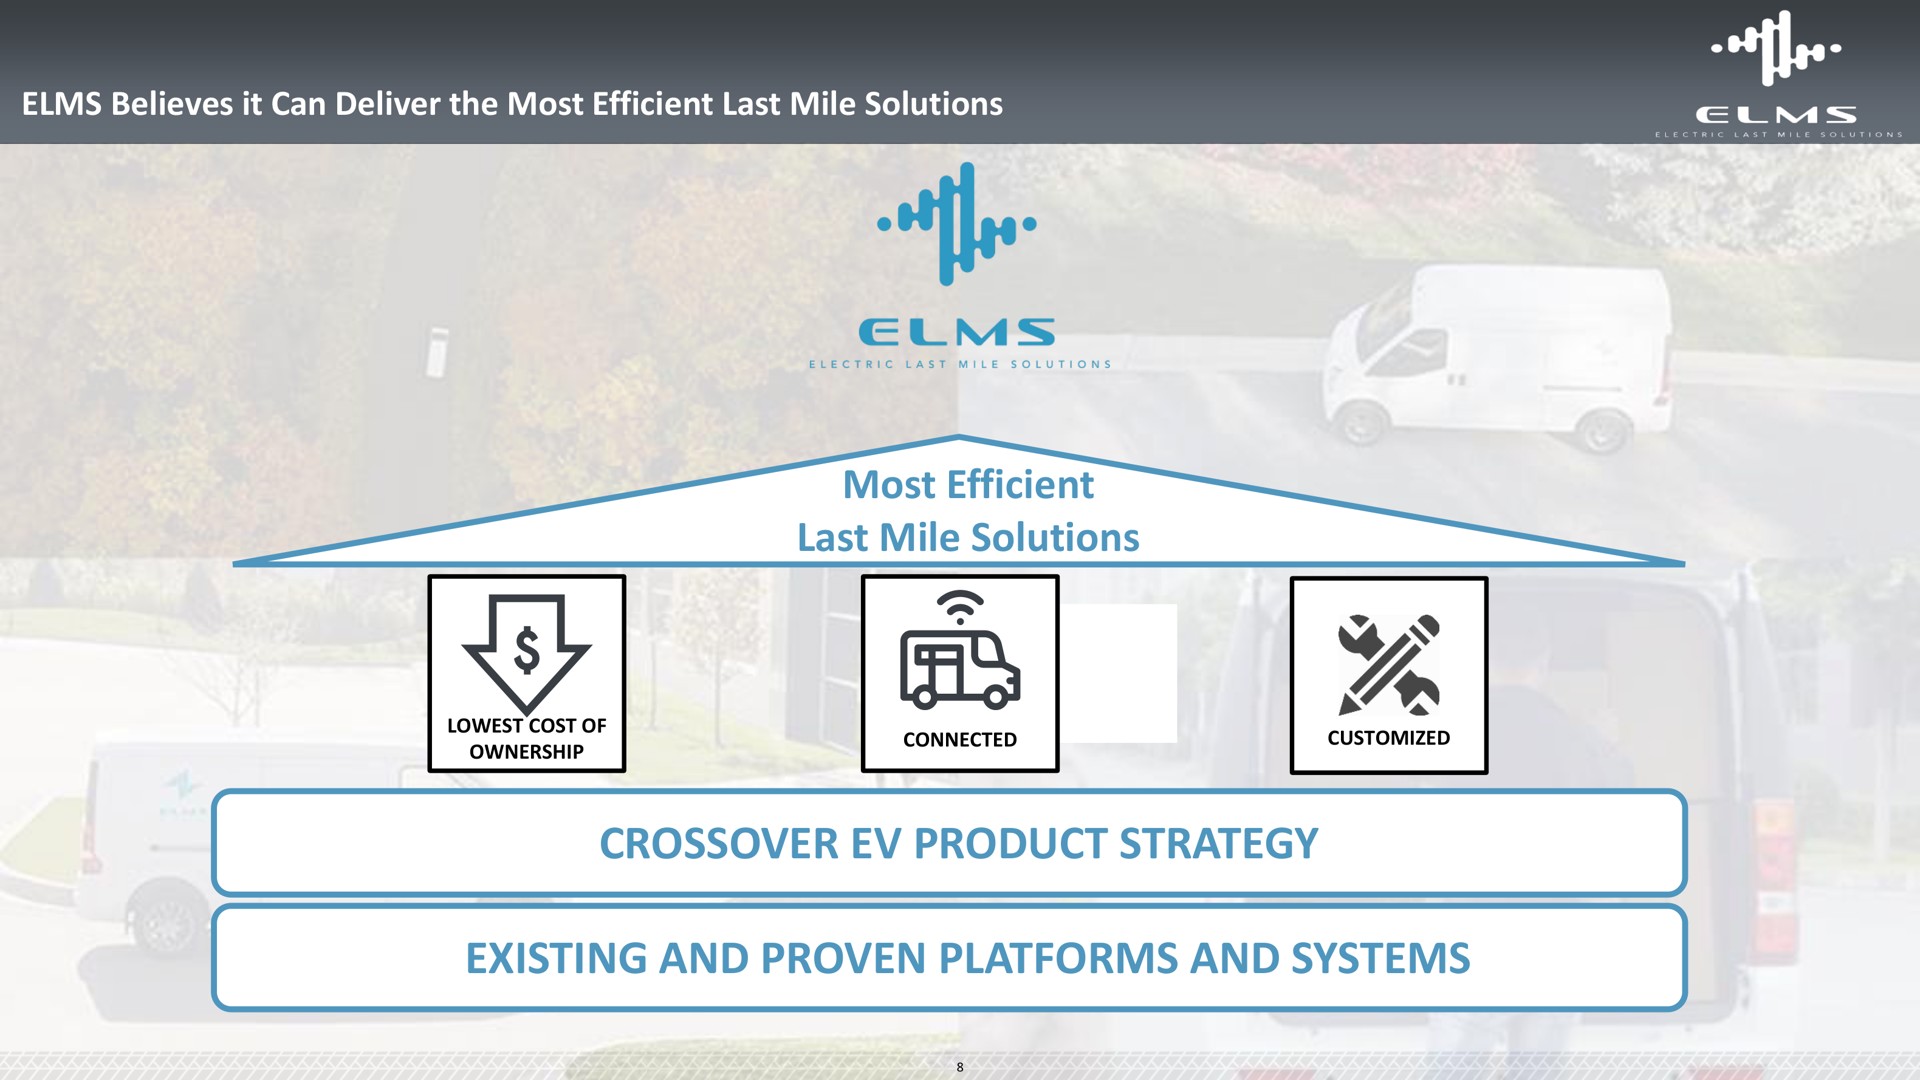 elms believes it can deliver the most efficient last mile solutions most efficient last mile solutions crossover product strategy existing and proven platforms and systems | Elms